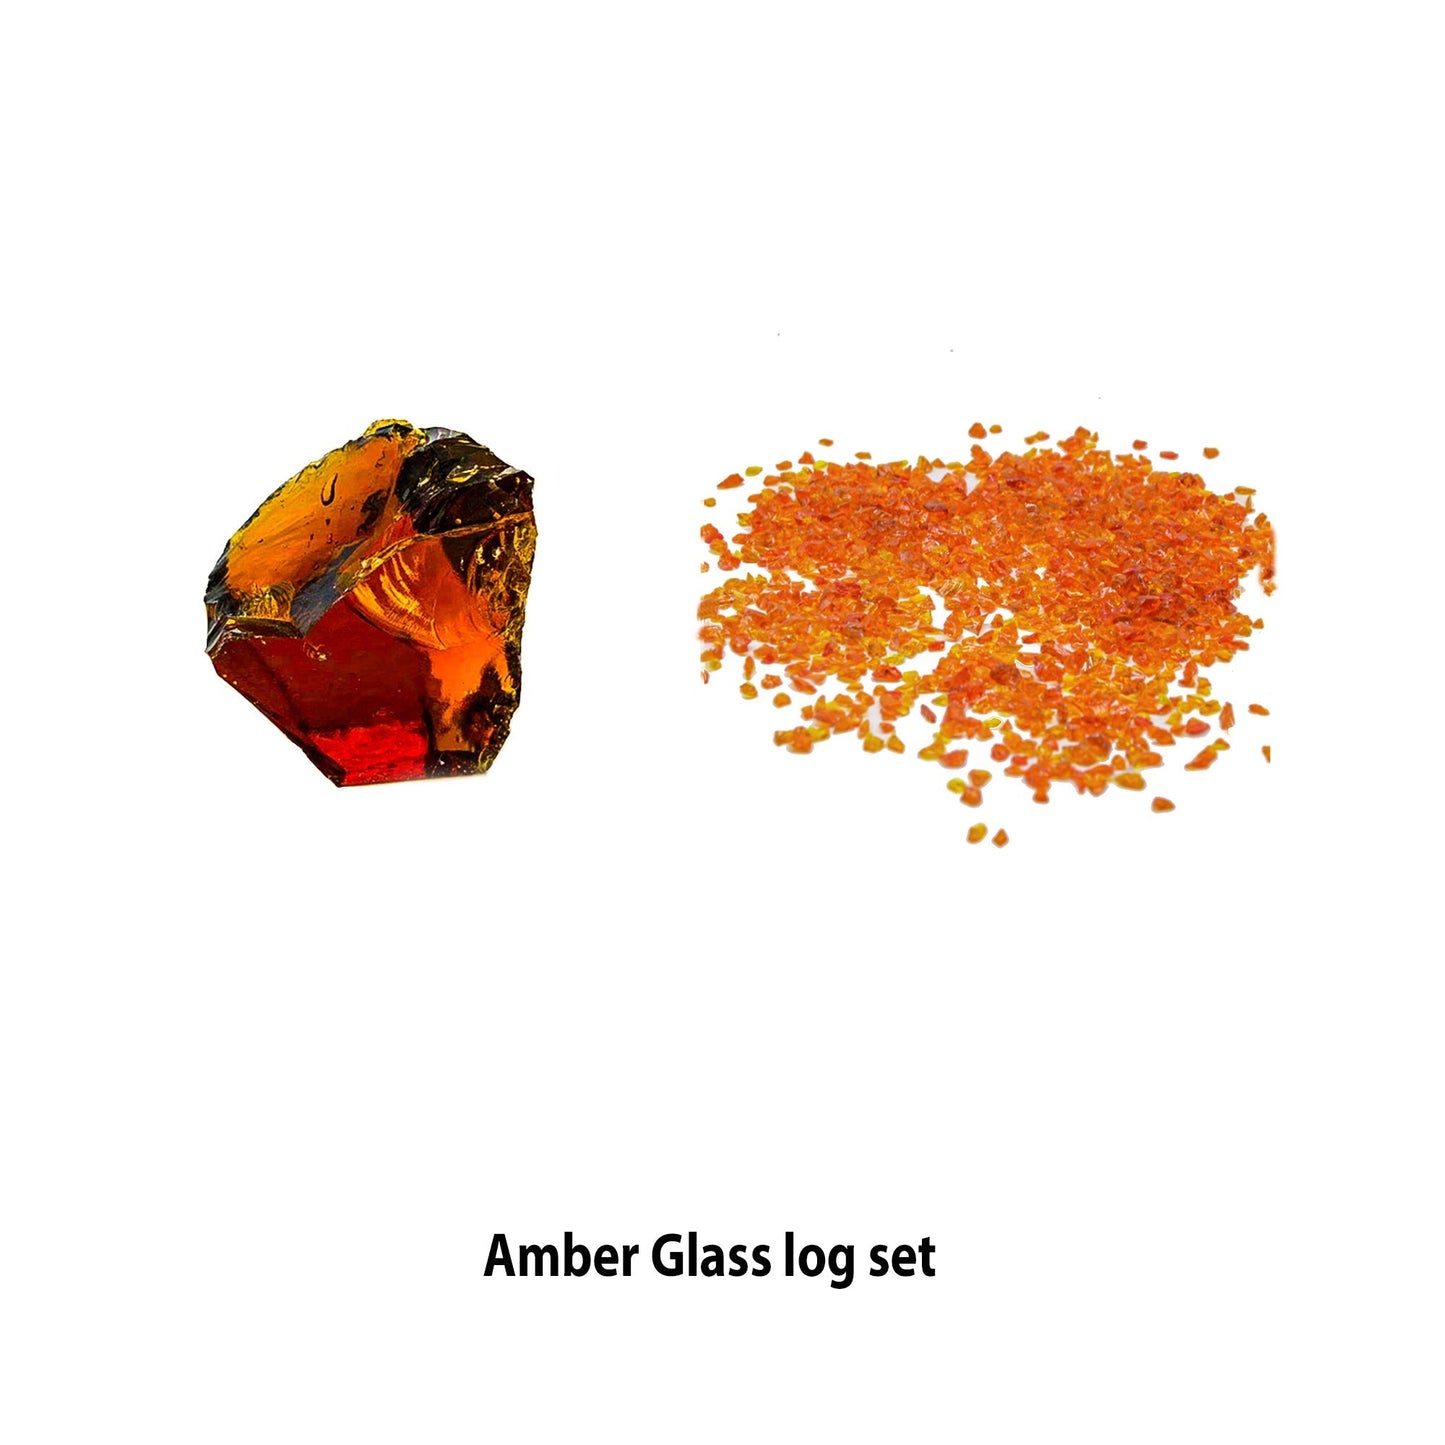 Zopaflame Amber Glass Decor Media Kit for 75-78 inch fireplace insert